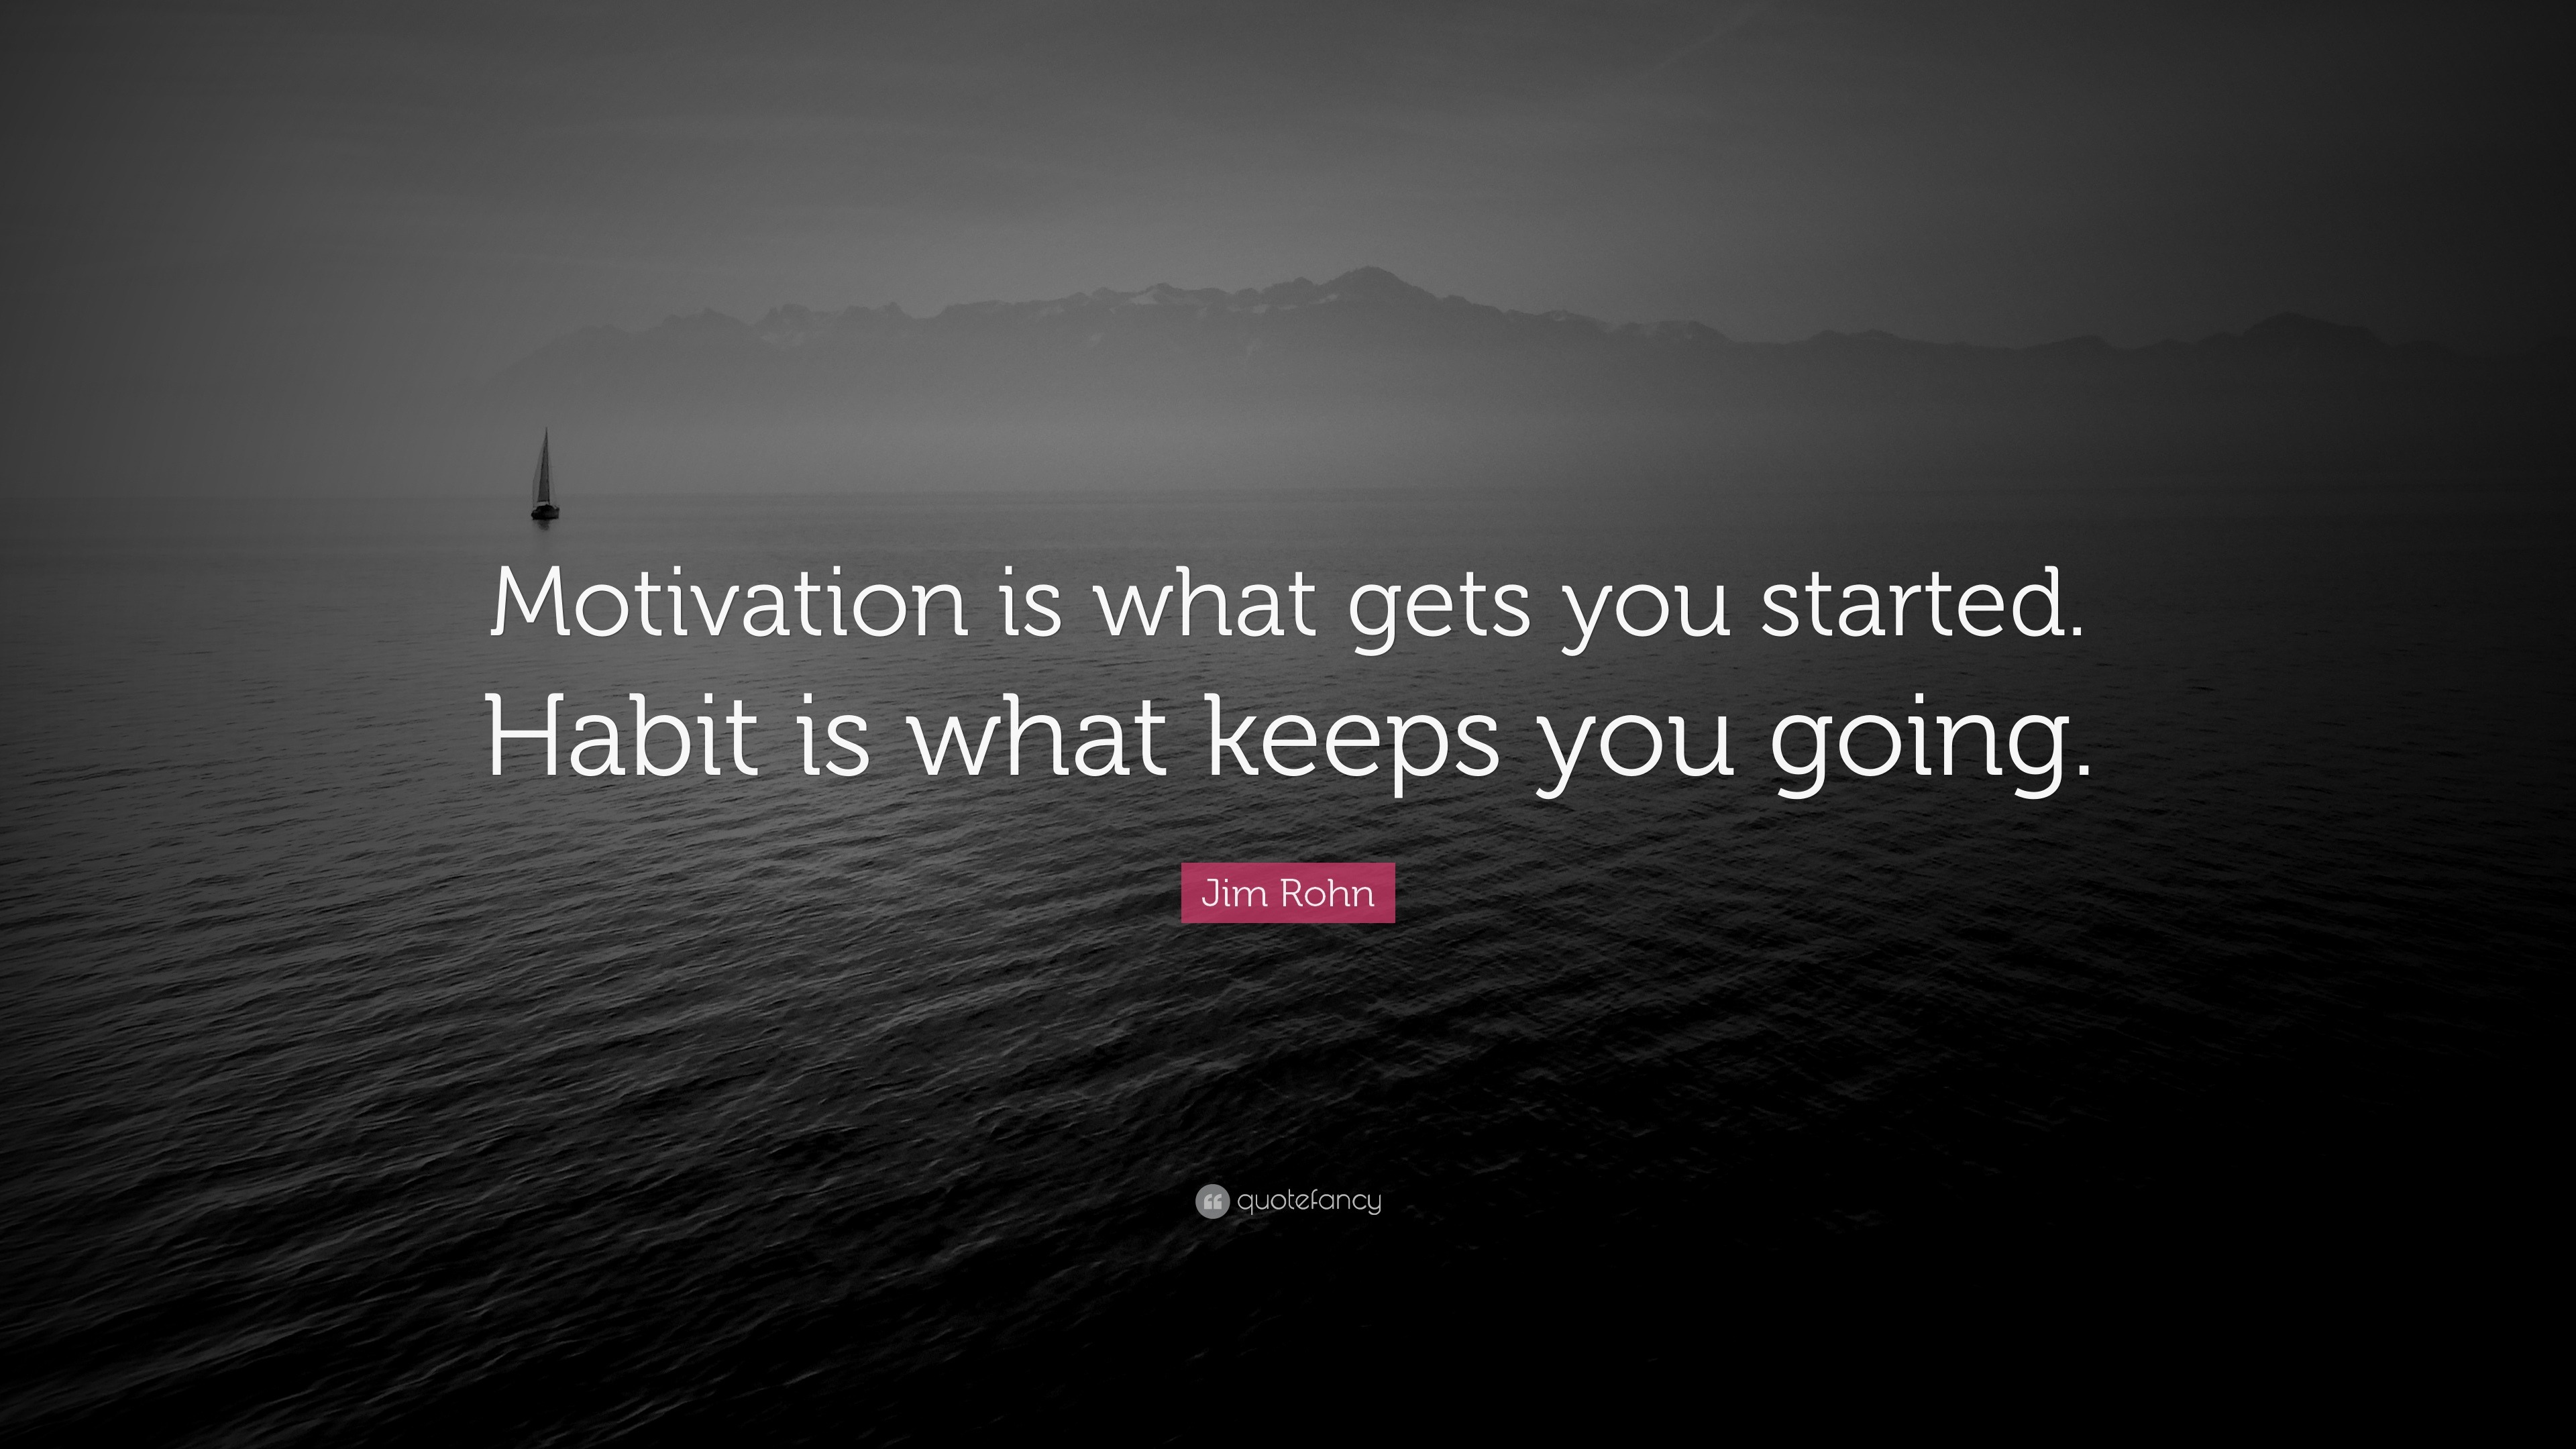 Jim Rohn Quote: “Motivation is what gets you started. Habit is what